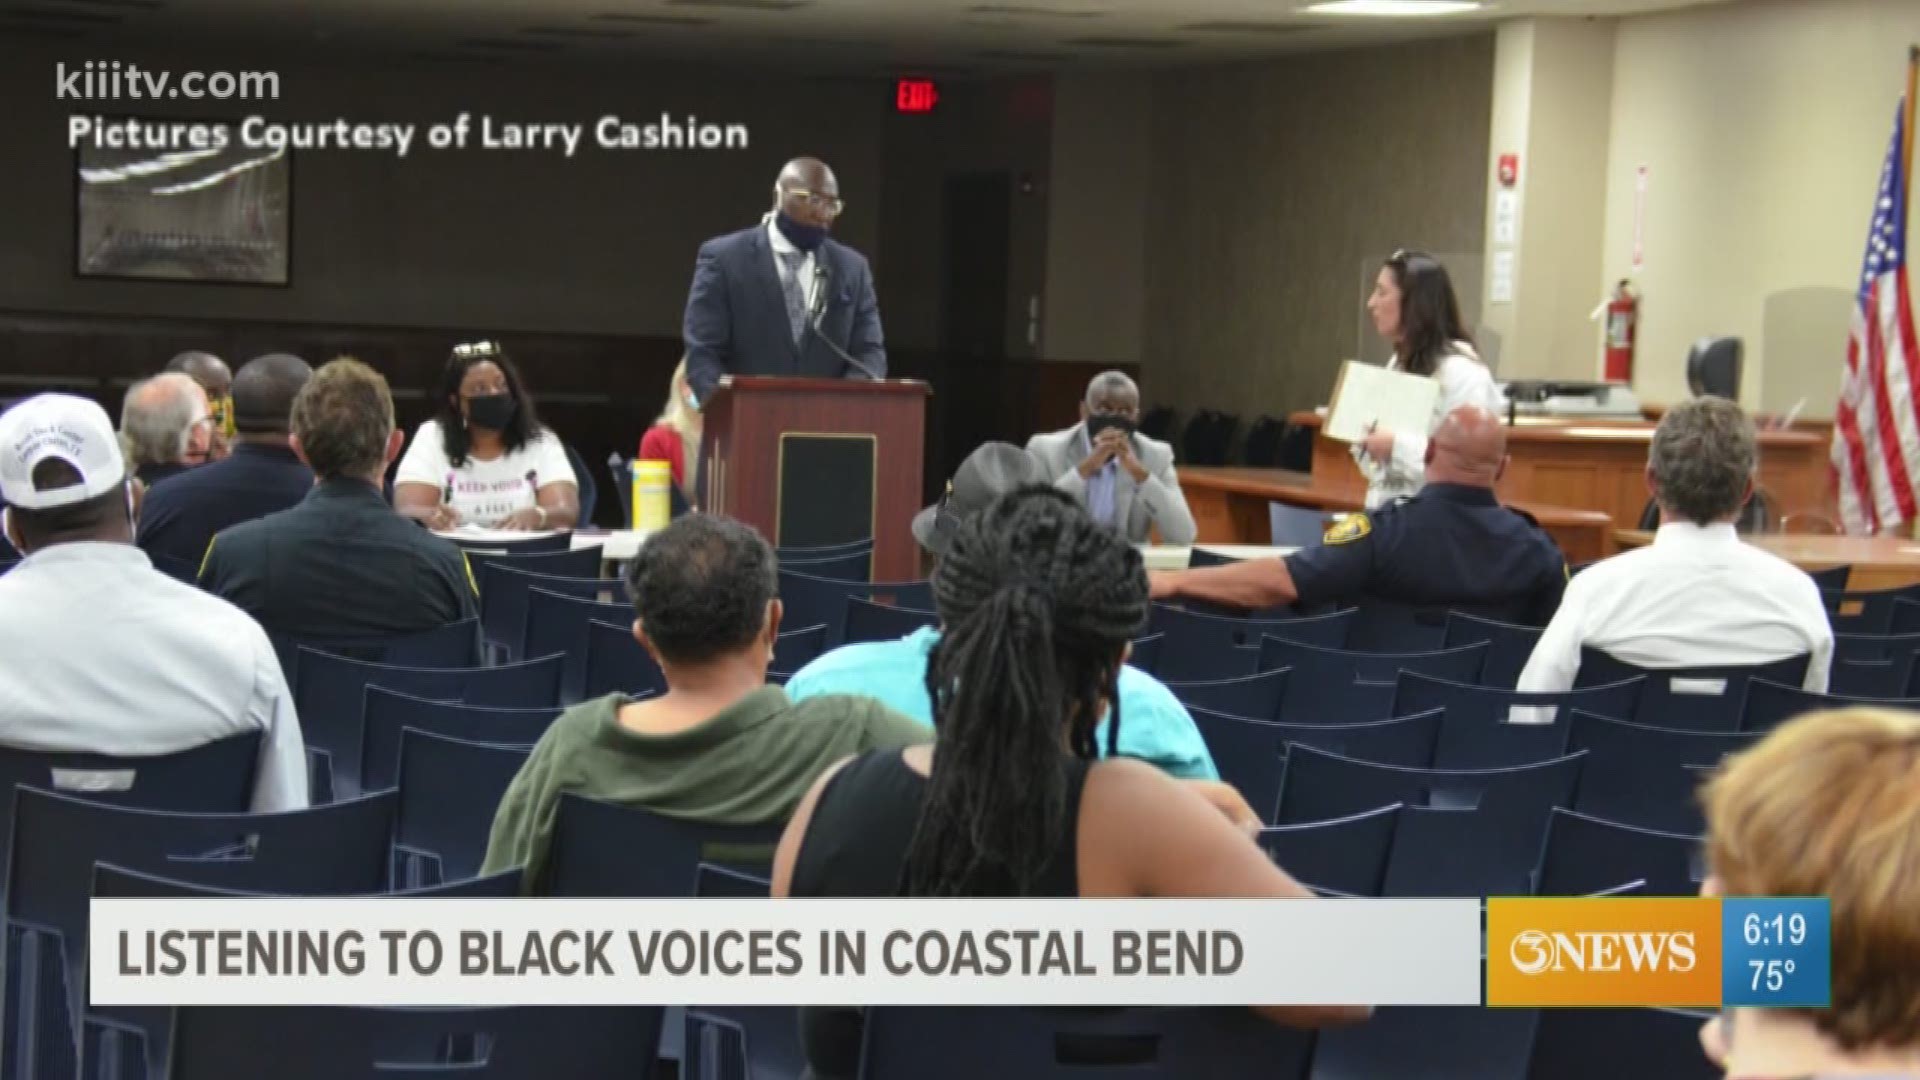 3 News Reporter Marissa Cummings shares a meeting that was held on Monday to discuss discrimination and inequality in the coastal bend black community